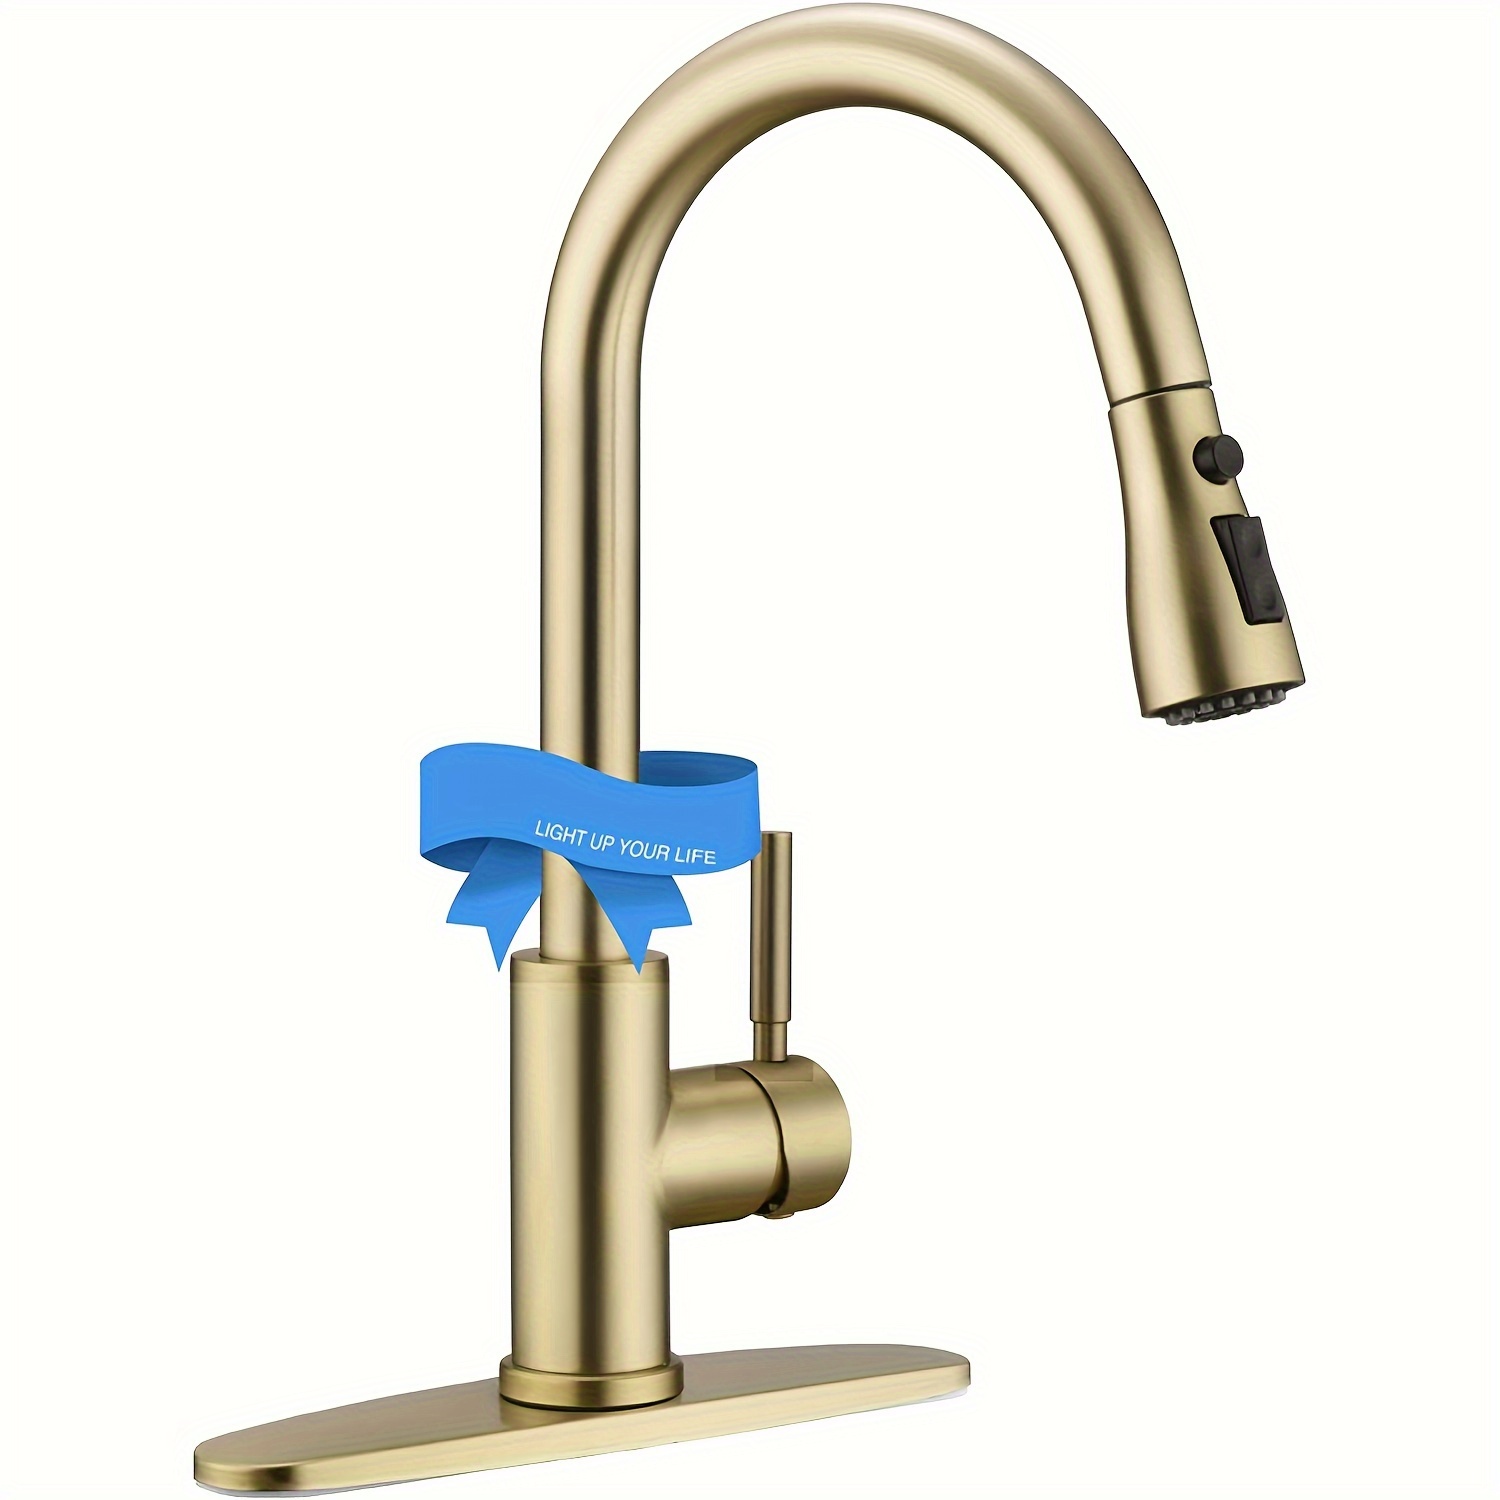 

Brushed Gold Kitchen Sink Faucet With Pull Out Spray, Swivel Single Handle High Arc Pull Down Stainless Steel Kitchen Mixer Faucet Brushed Gold Single Hole Tap